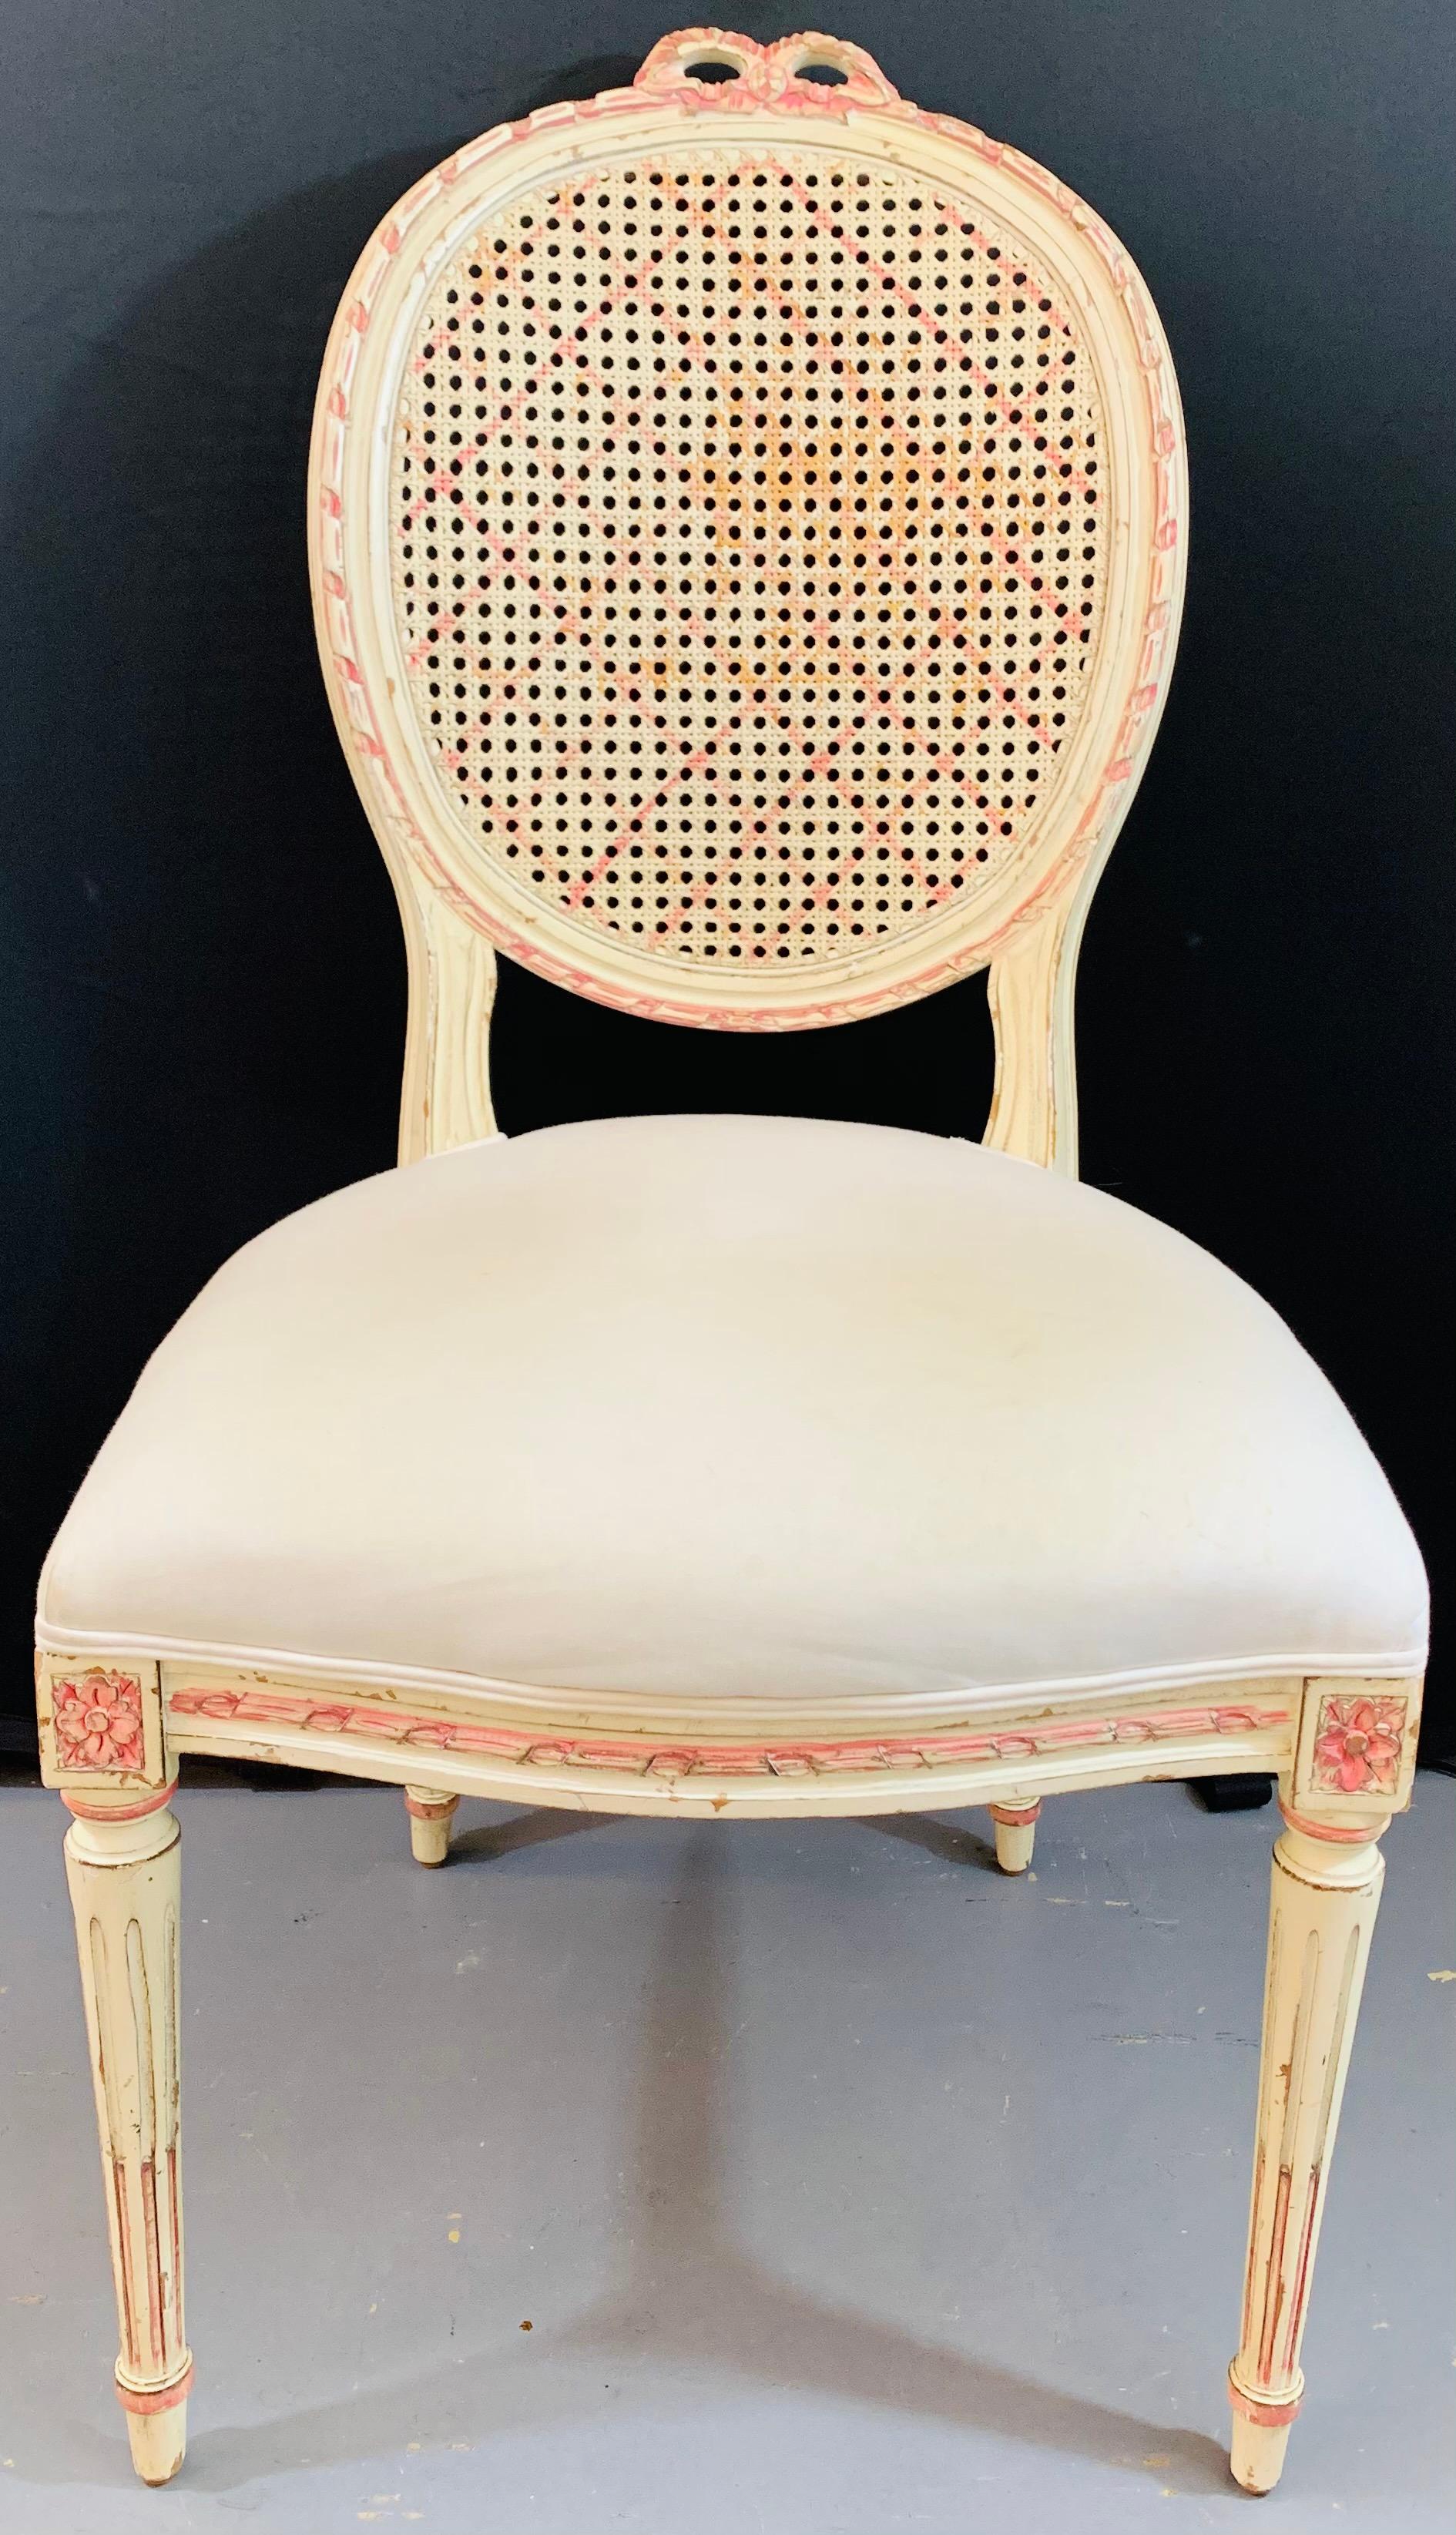 A beautiful Louis XVI style French Provincial ladies' chair. The chair is handprinted in an antiqued white and nicely decorated with pink. Prefect chair to use as desk chair, side or vanity desk chair as well or in any area. 

Dimensions: 20